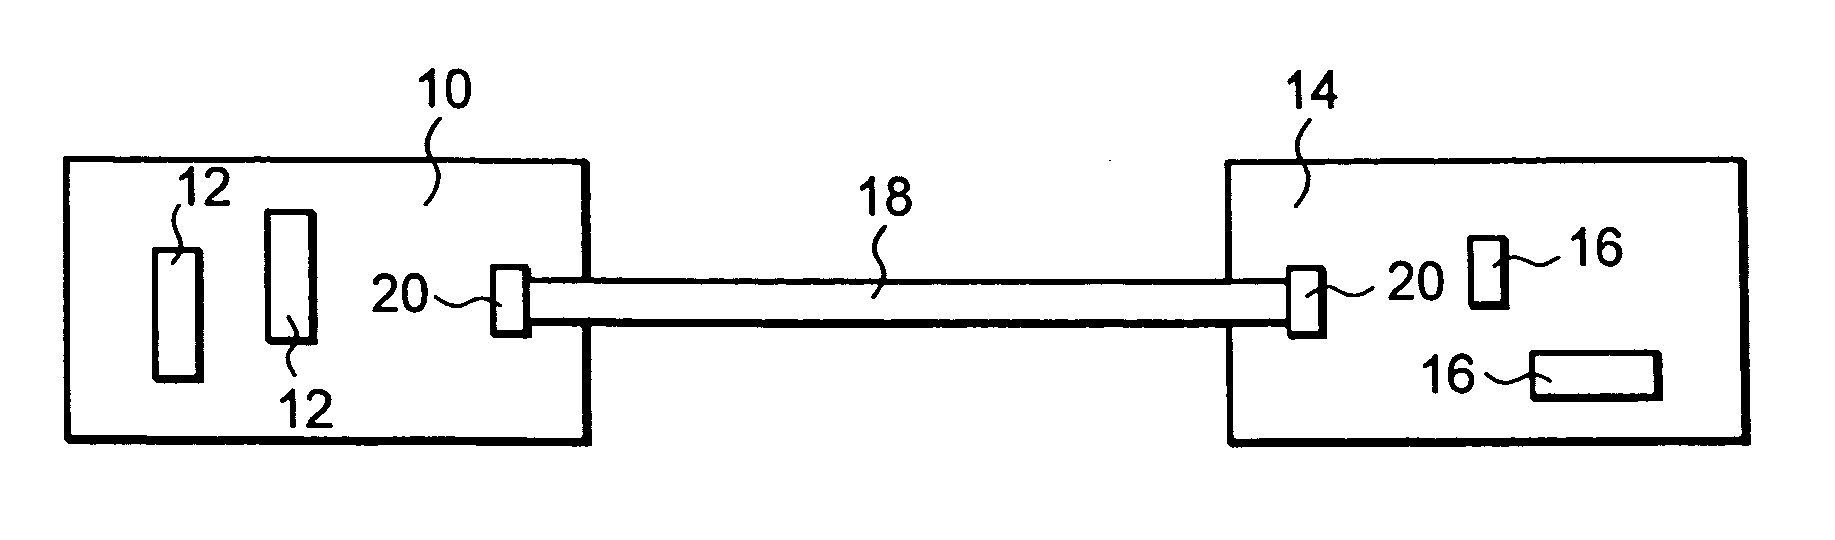 Electrical connector with elastomeric element and restrainer member to offset relaxation of the elastomer